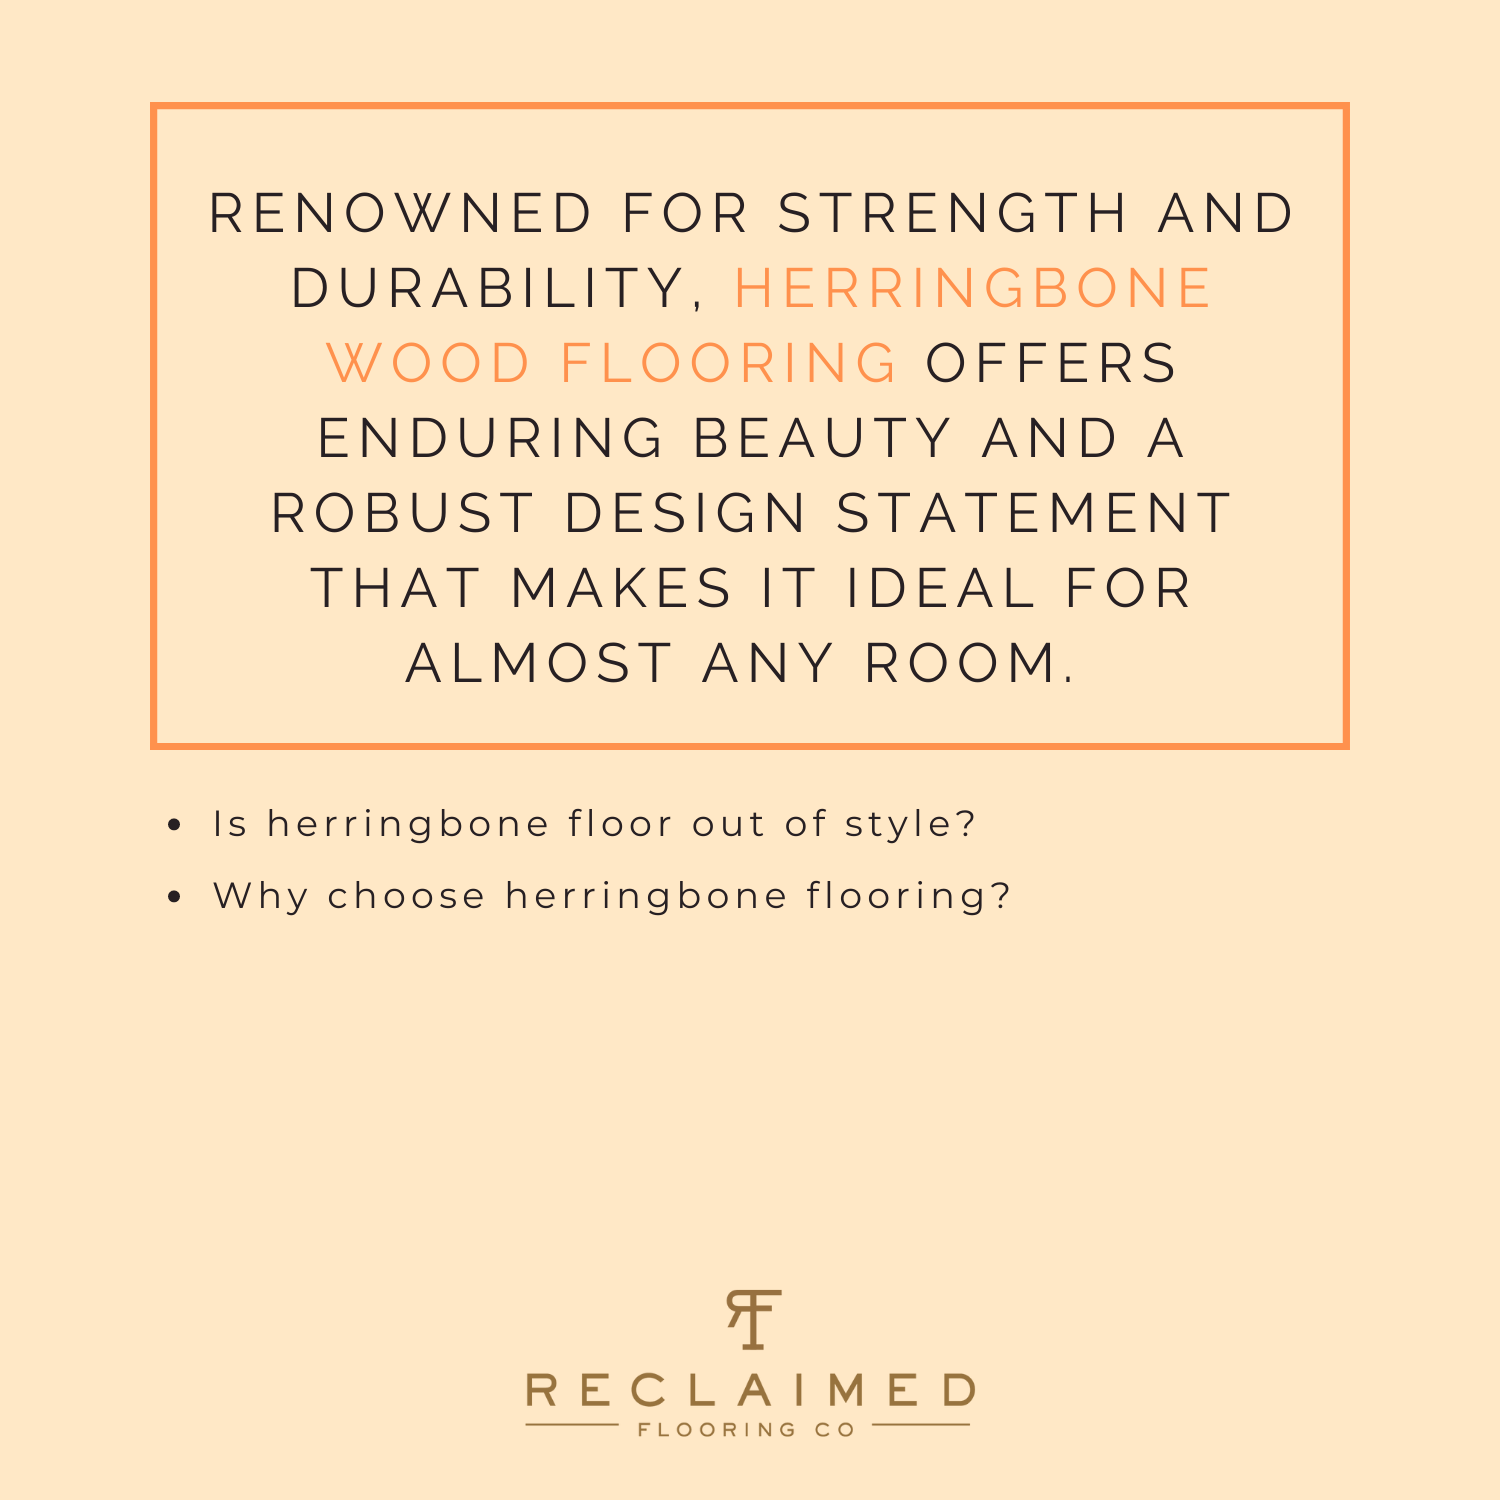 Renowned for strength and durability, herringbone wood flooring offers enduring beauty and a robust design statement that makes it ideal for almost any room.